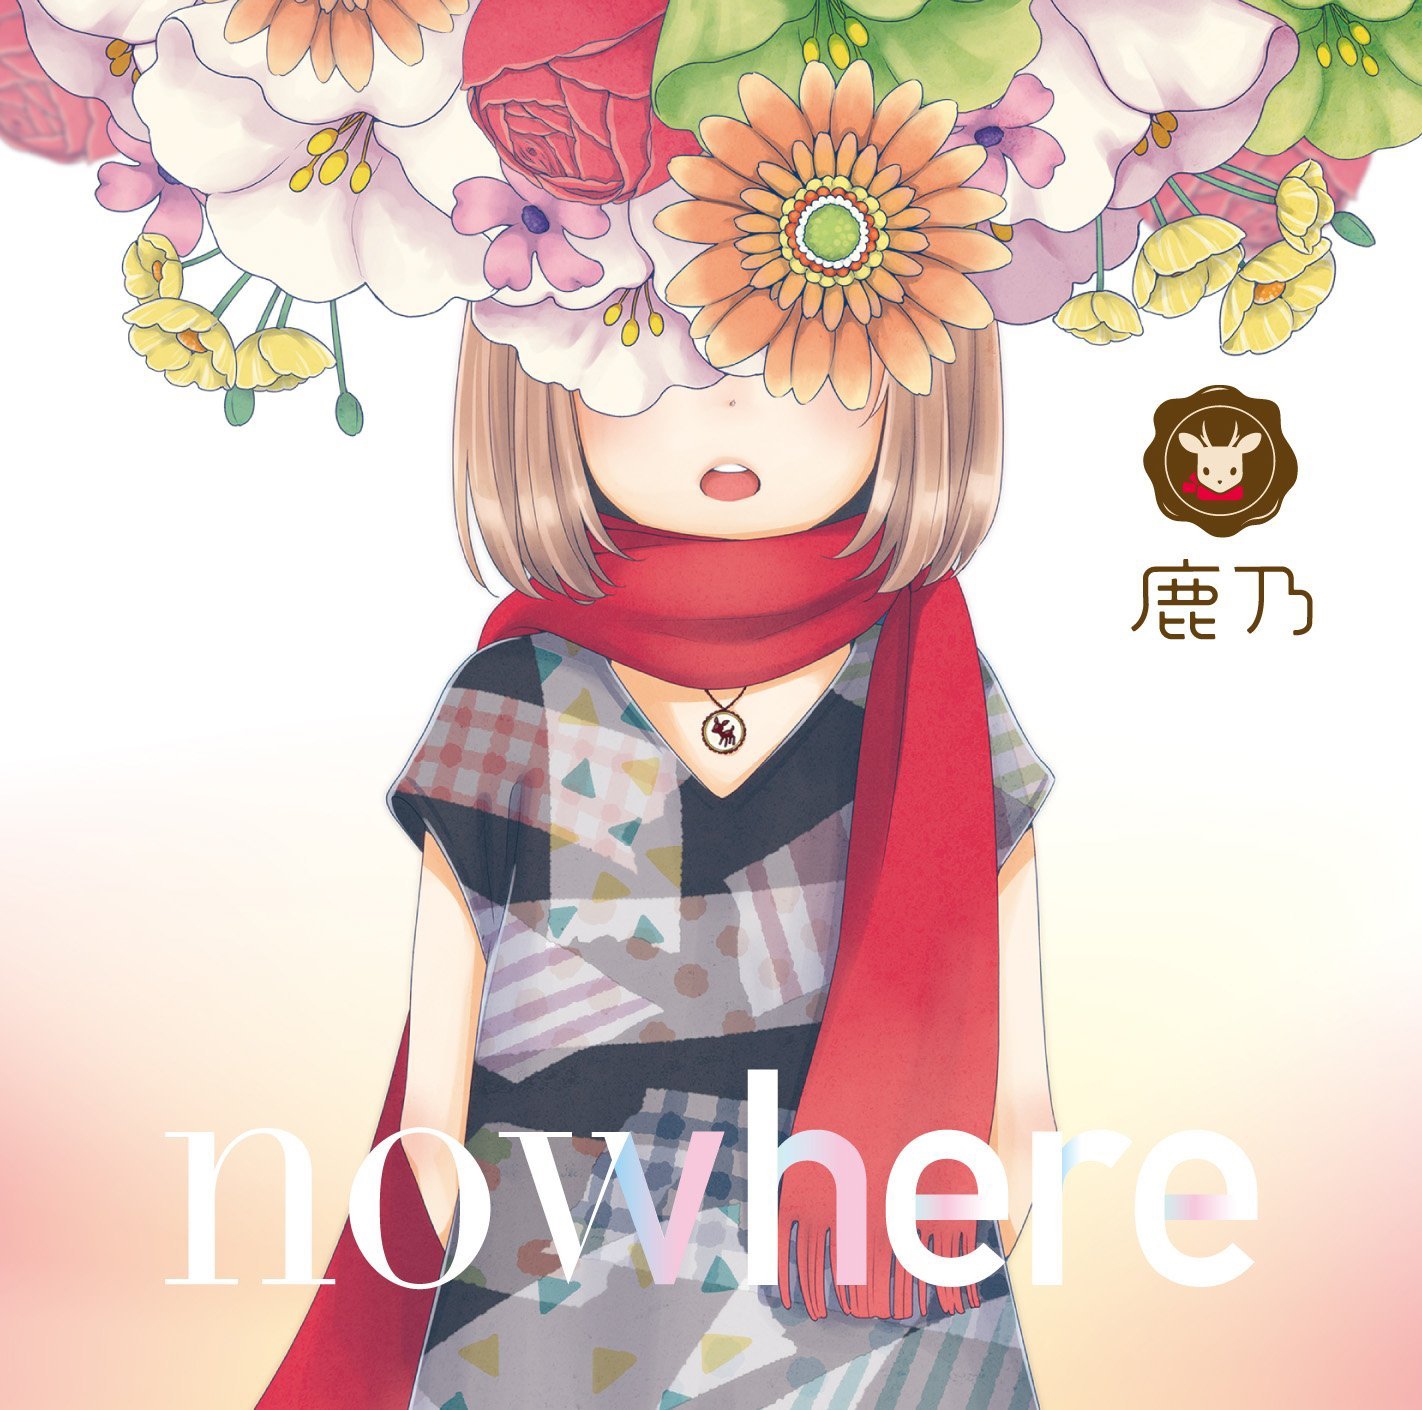 nowhere | 鹿乃 official site